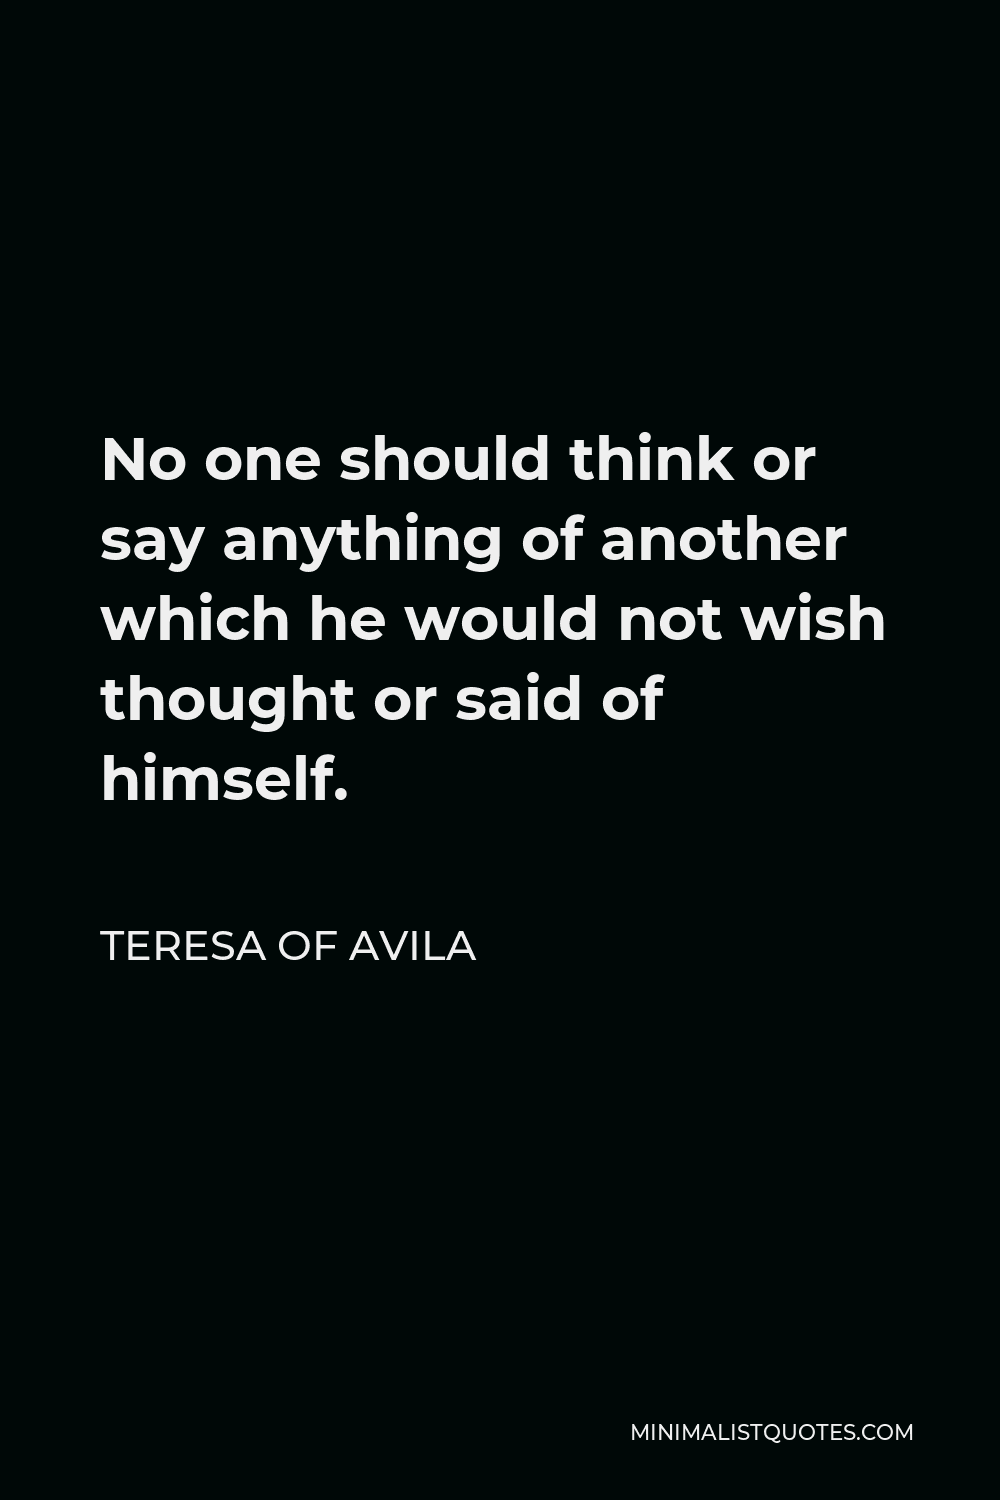 Teresa of Avila Quote - No one should think or say anything of another which he would not wish thought or said of himself.